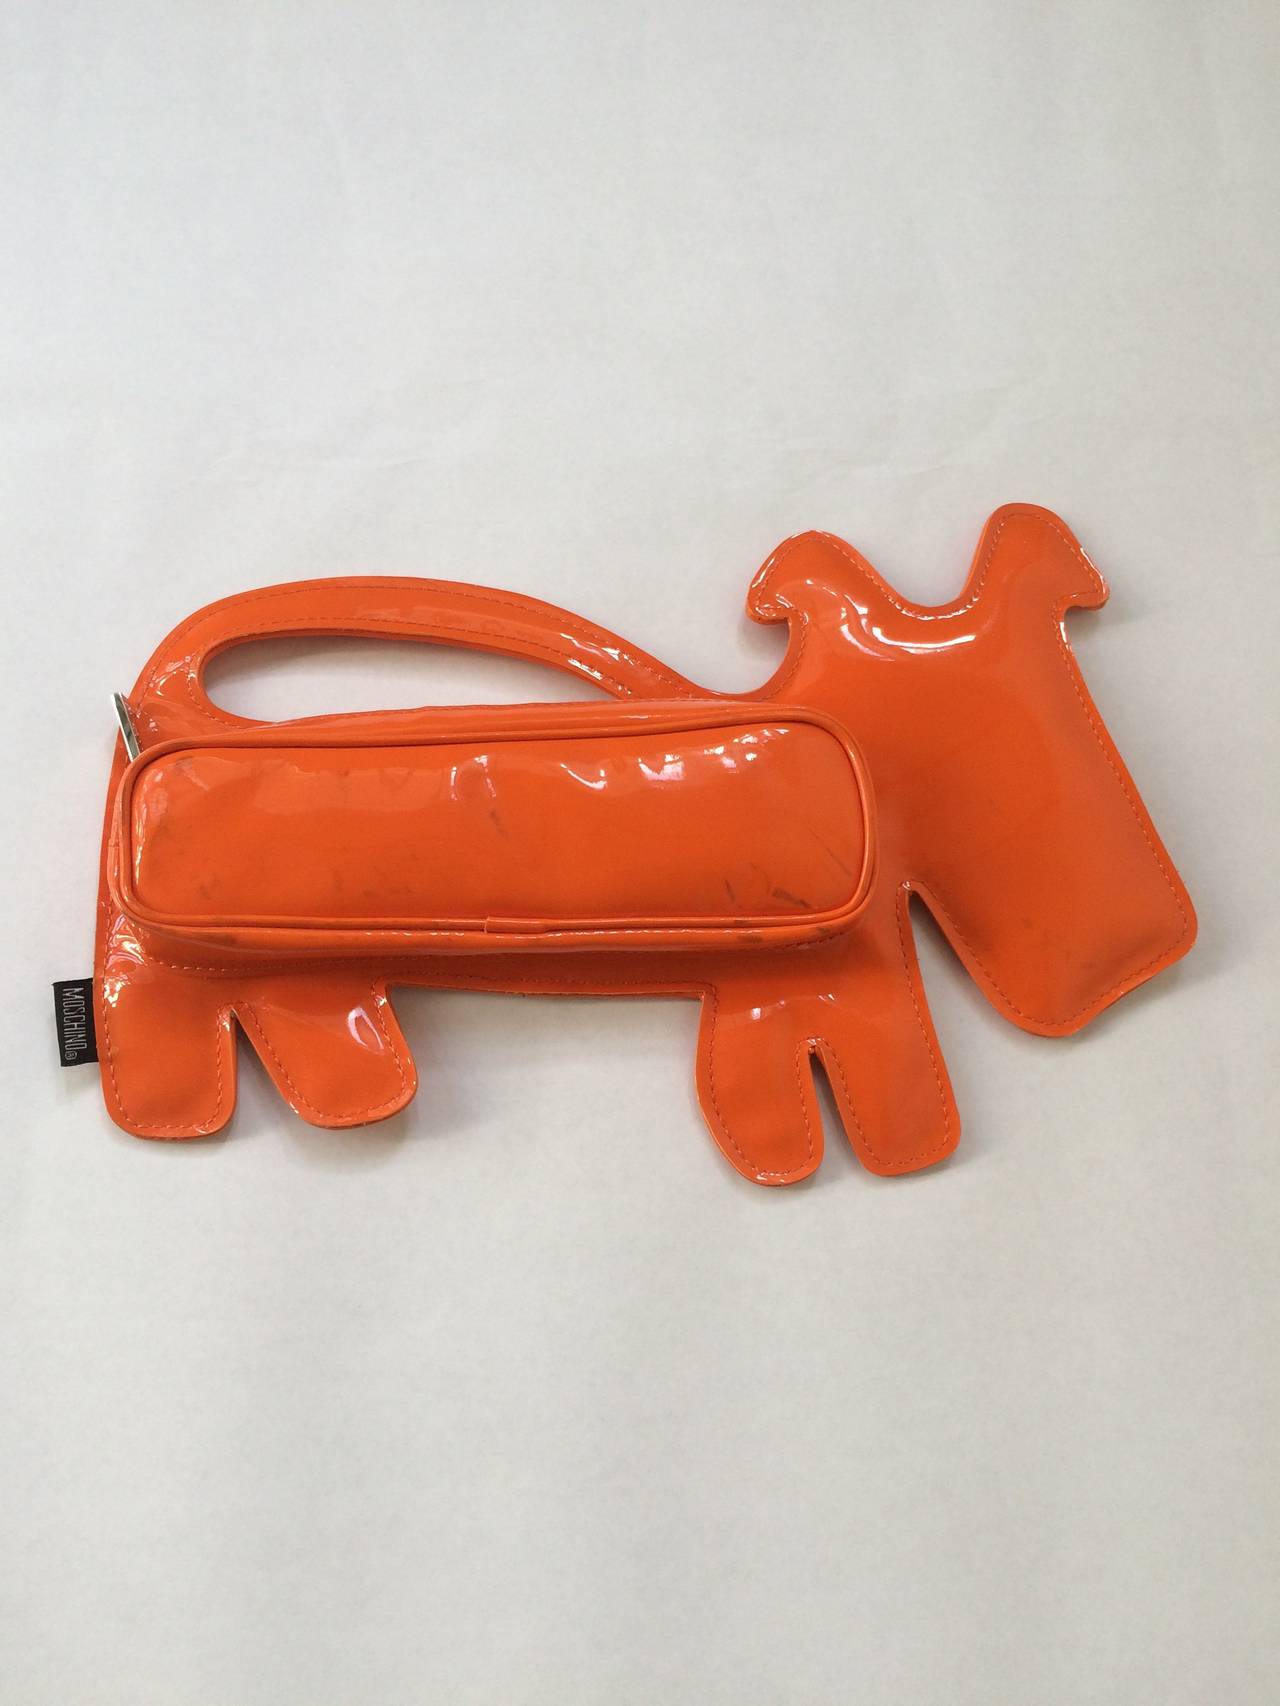 Moschino orange vinyl dog clutch / bag from the 2000s. Moschino Jeans made in Italy. Franco Moschino was born near Milan in 1950,  he studied art then began his career in 1971 as a sketcher for Giorgio Armani. This uber stylish Italian bag will have